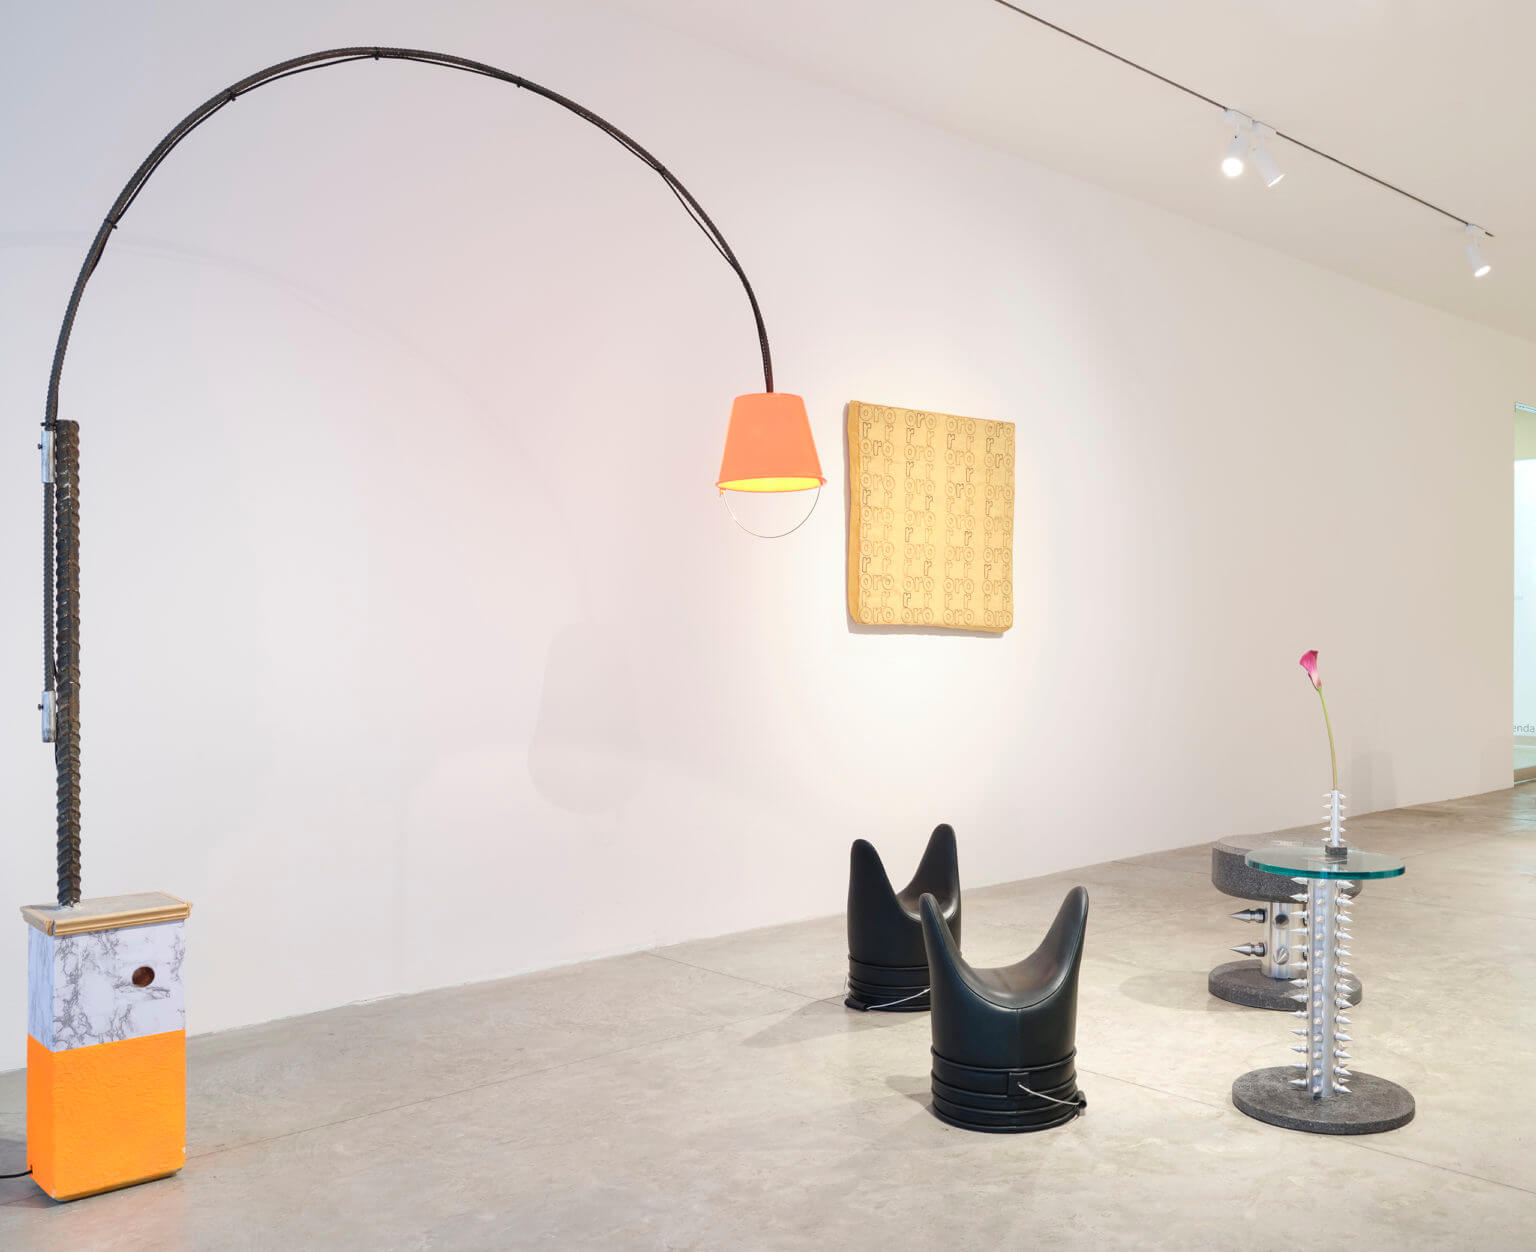 lamp and objects on floor in gallery space